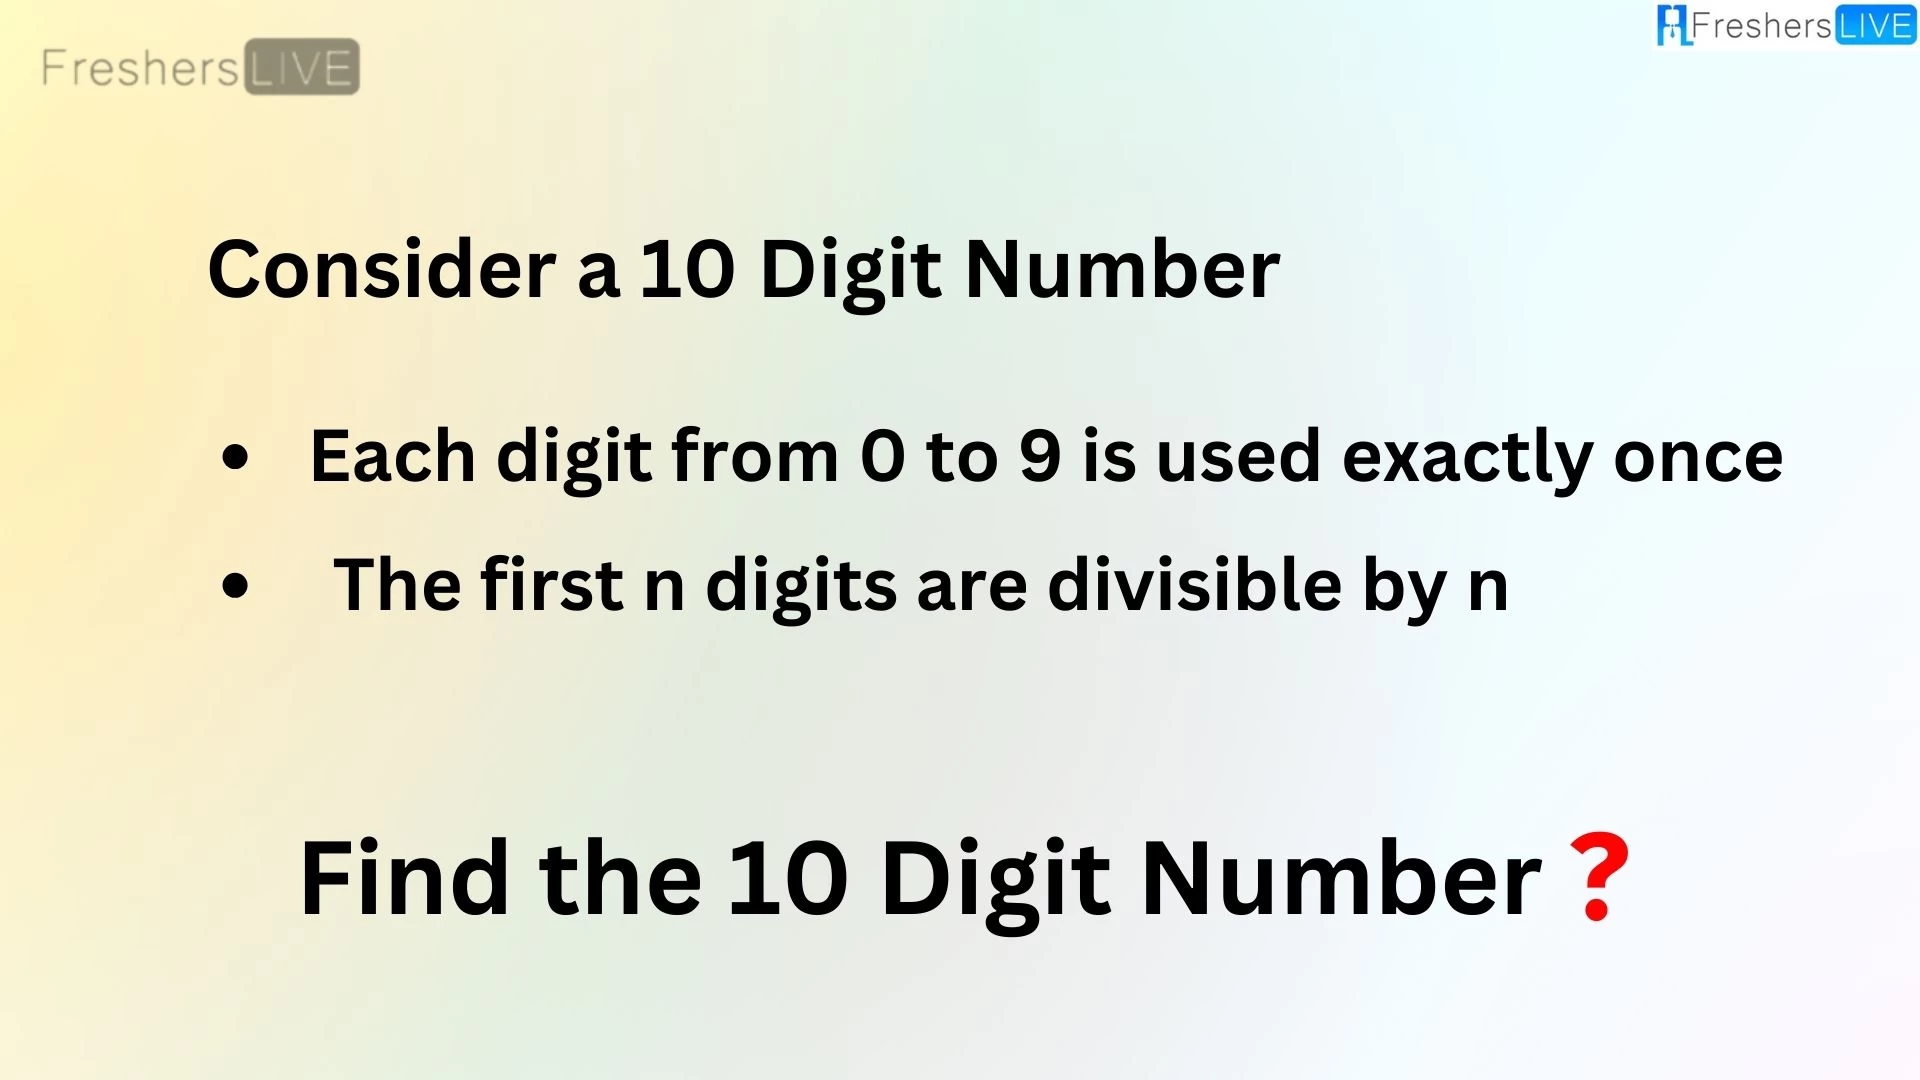 How Can You Solve the Classic 10 Digit Number Puzzle?